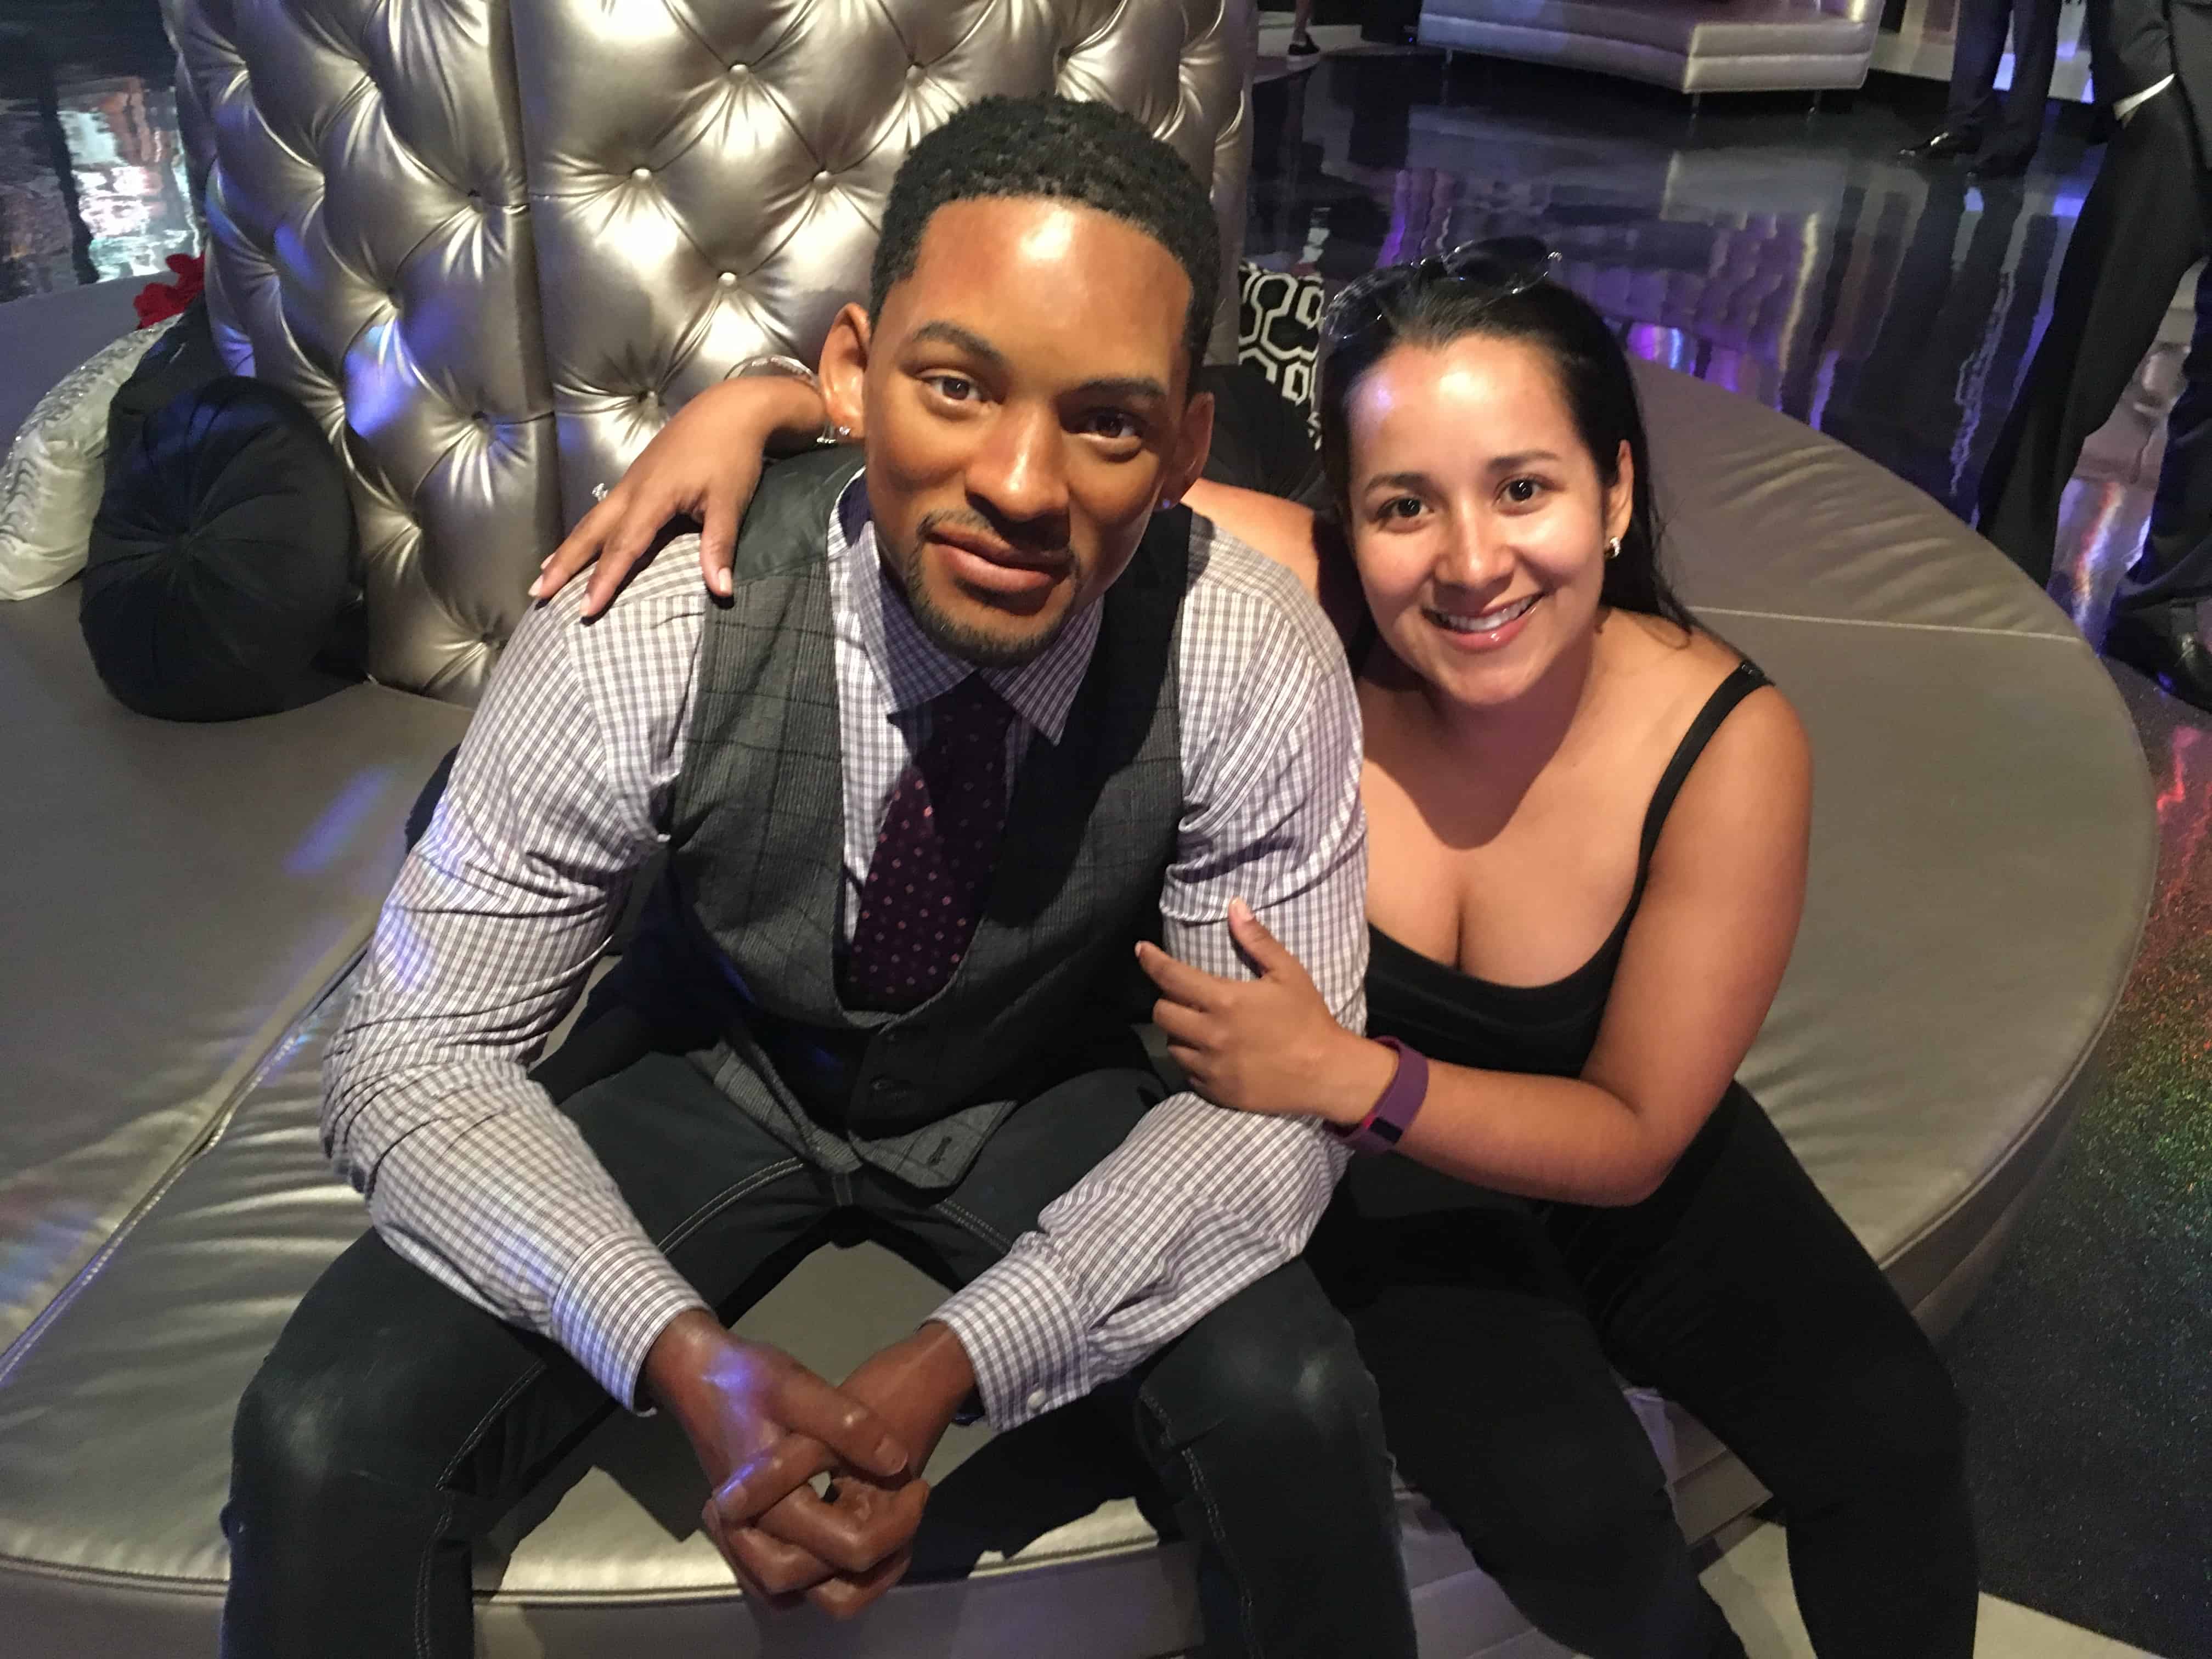 Marisol with Will Smith at Madame Tussauds Las Vegas